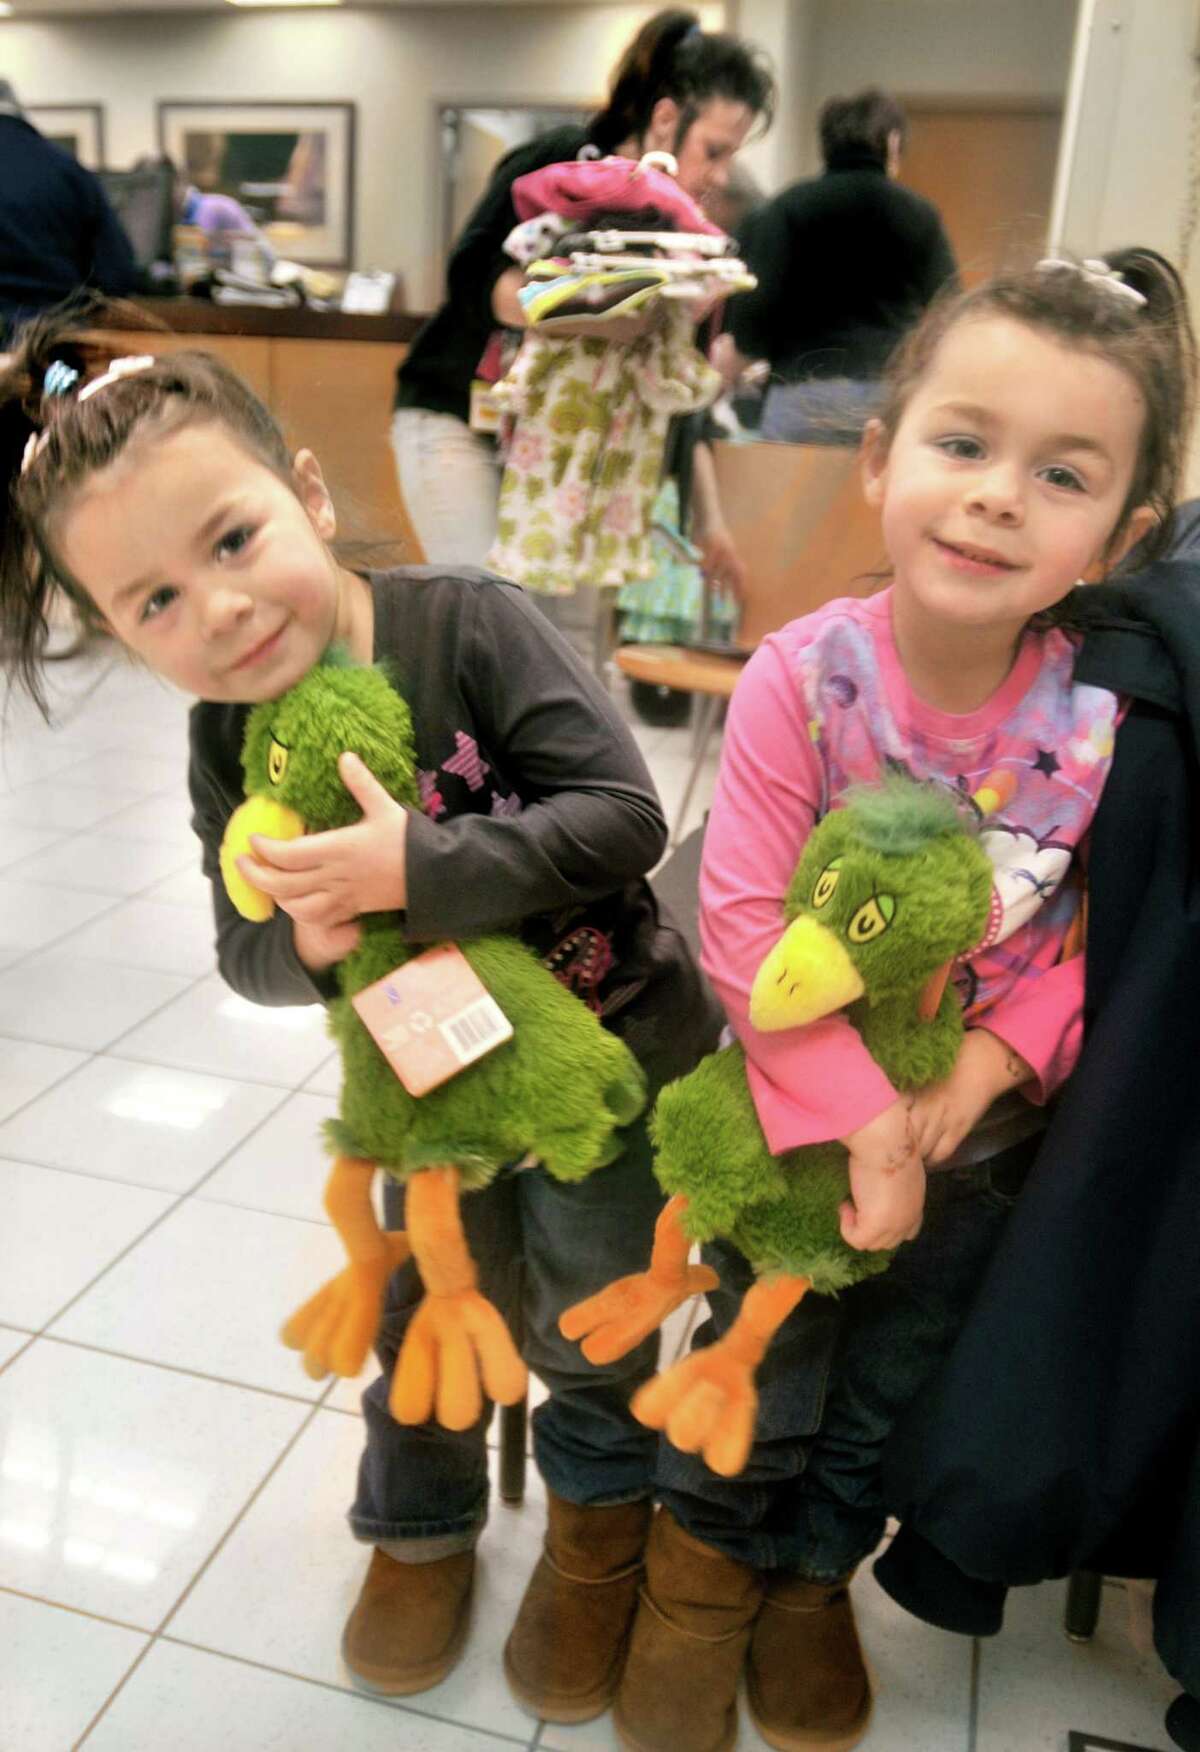 Twins Angie and Christine Goraieb, 4, of East Haven, hold stuffed toys while their mother, Cindy Perillo, organizes their purchases at the Kohl's department store in Branford during the East Haven Rotary Club’s 12th annual "Clothe the Children" campaign in 2012.